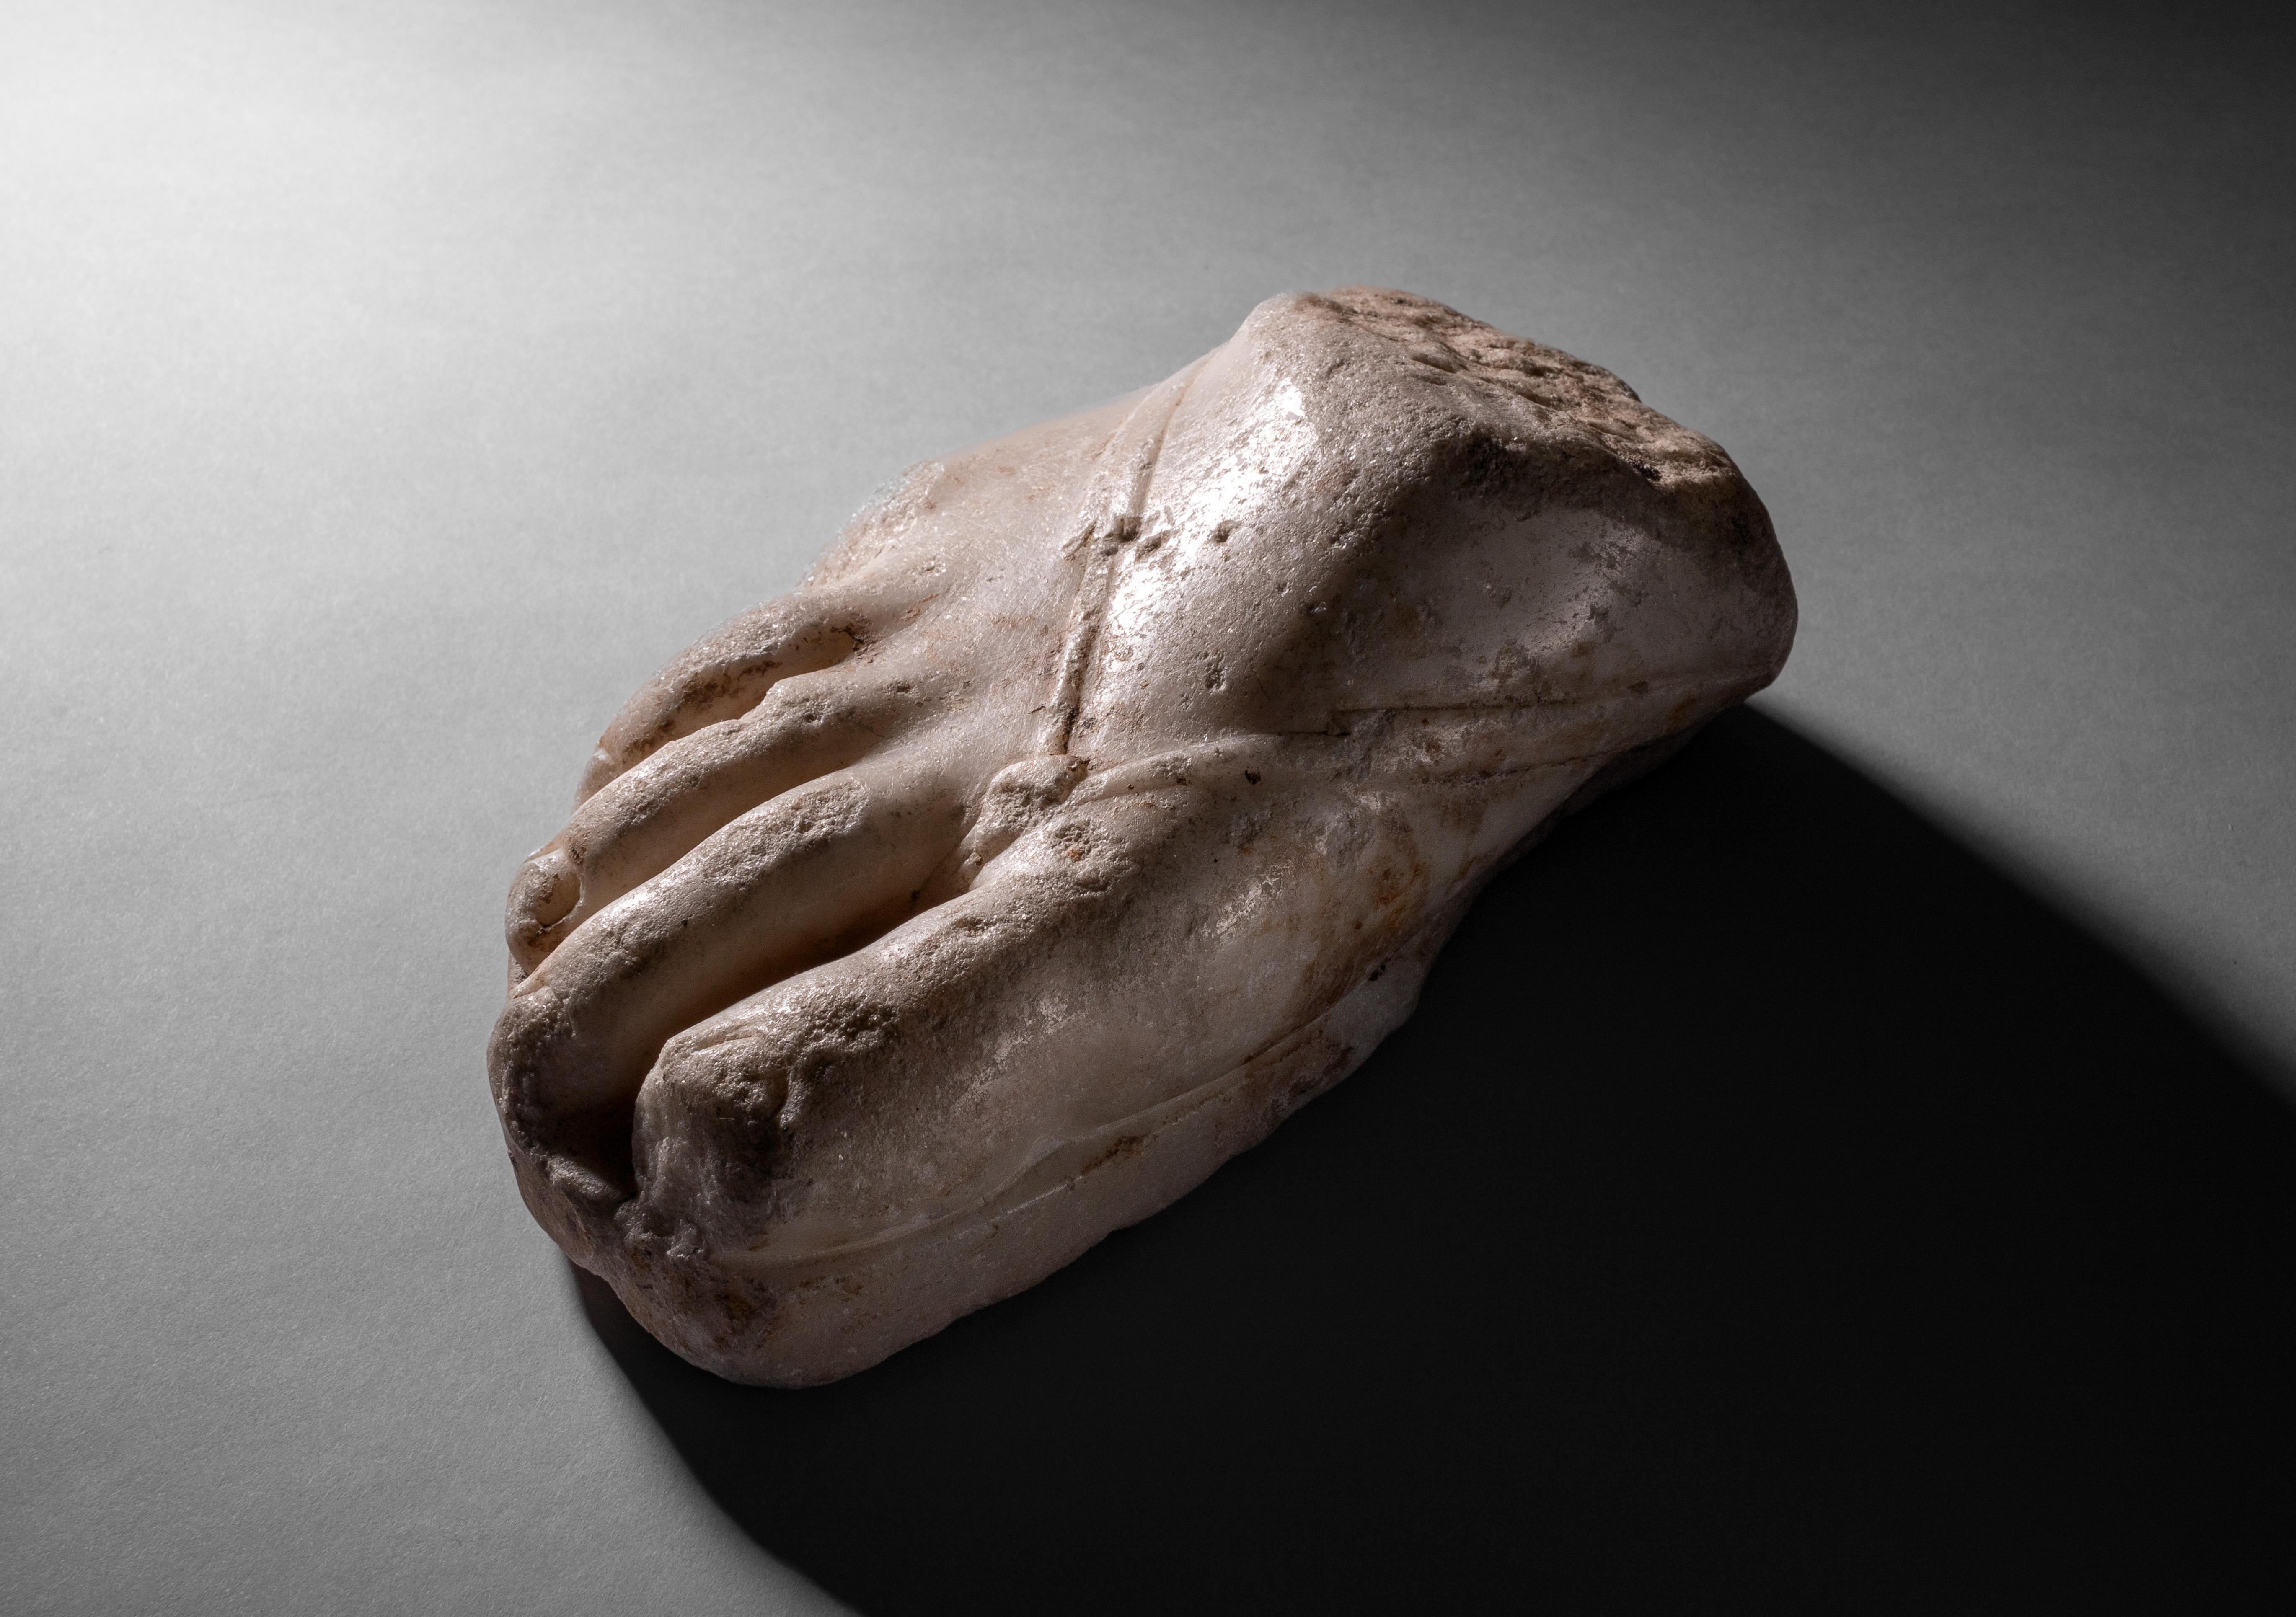 Roman marble Fragment of a Right Foot with Sandal
Circa 1st - 2nd Century A.D.

An evocative Roman marble fragment, preserving the front portion of an over-lifesized sandalled foot. The toes, nails, and bridge of the foot have been sensitively